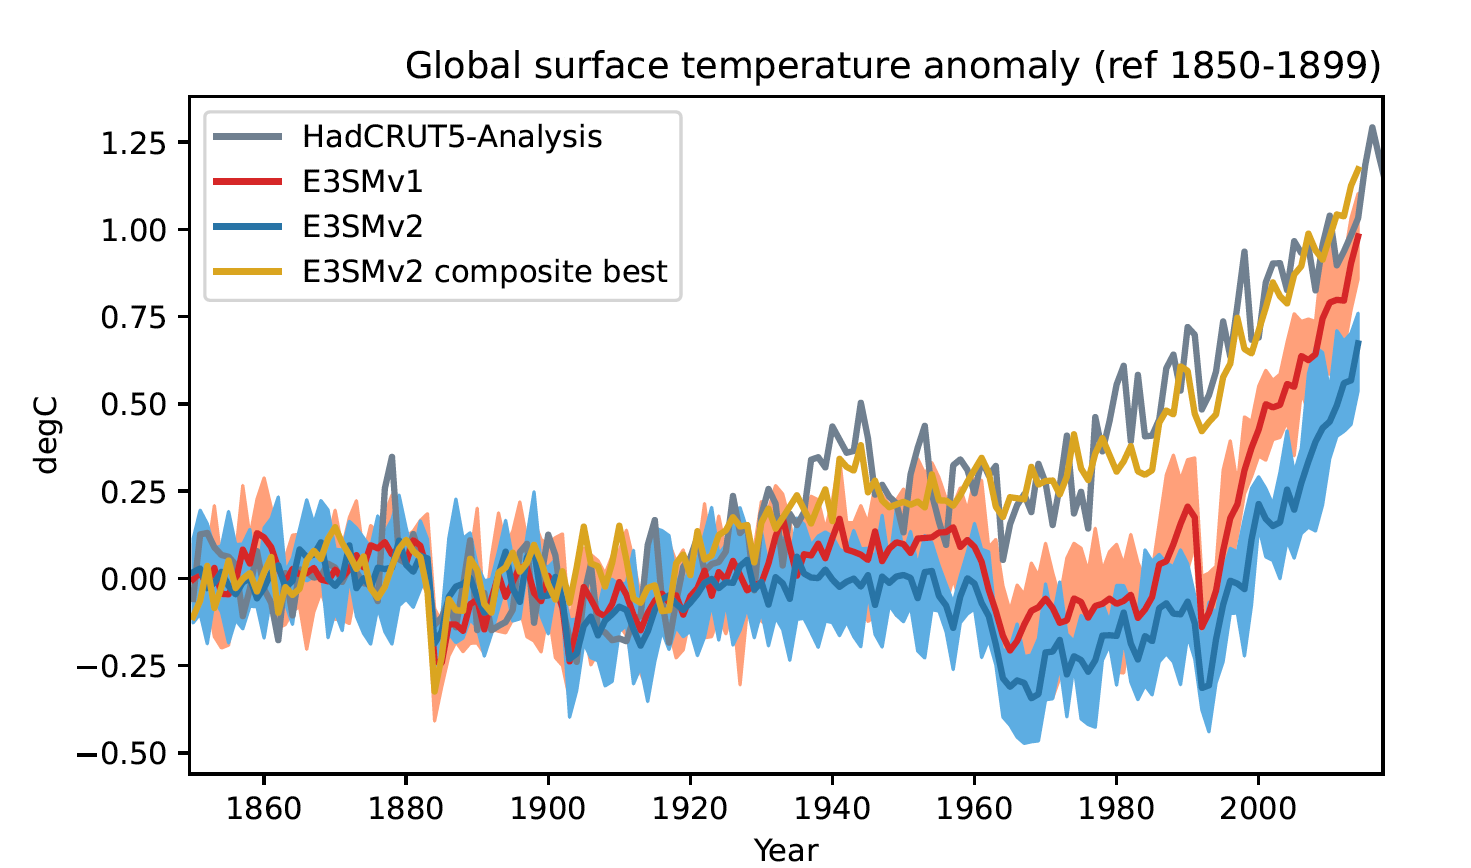 Time evolution of annual global mean surface